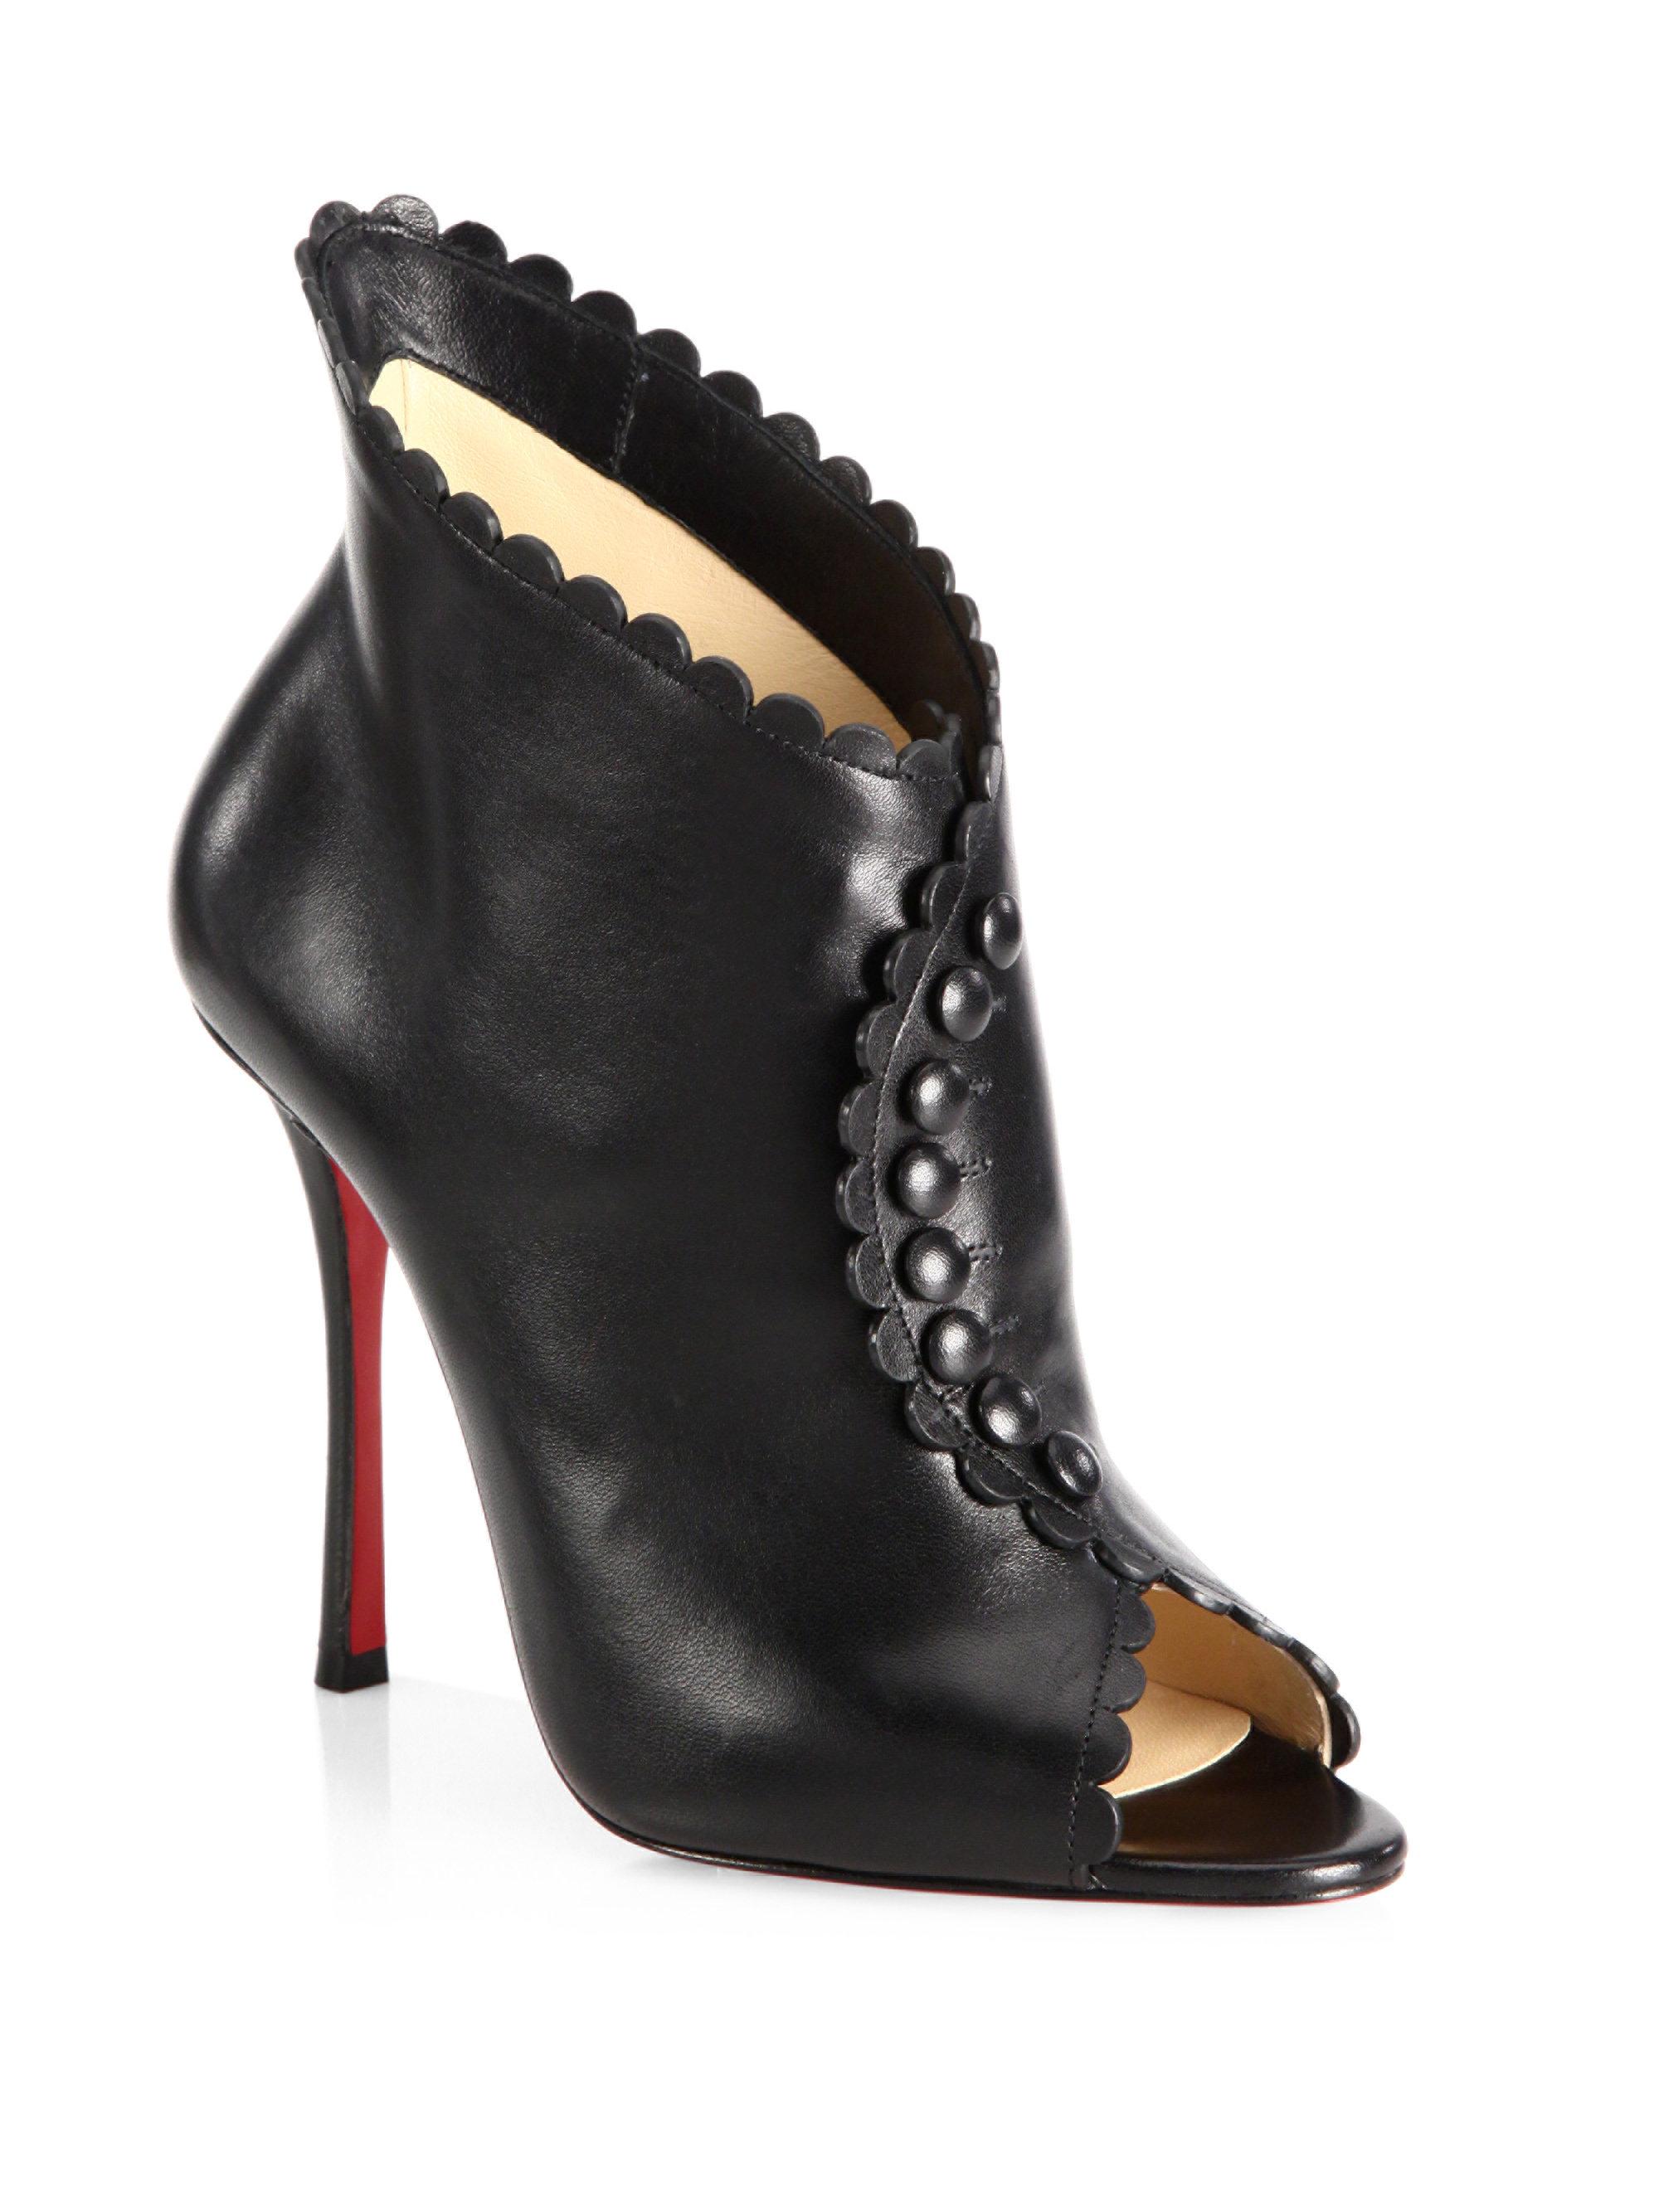 Christian Louboutin Deguise 100 Scalloped Leather Peep-toe Booties in ...